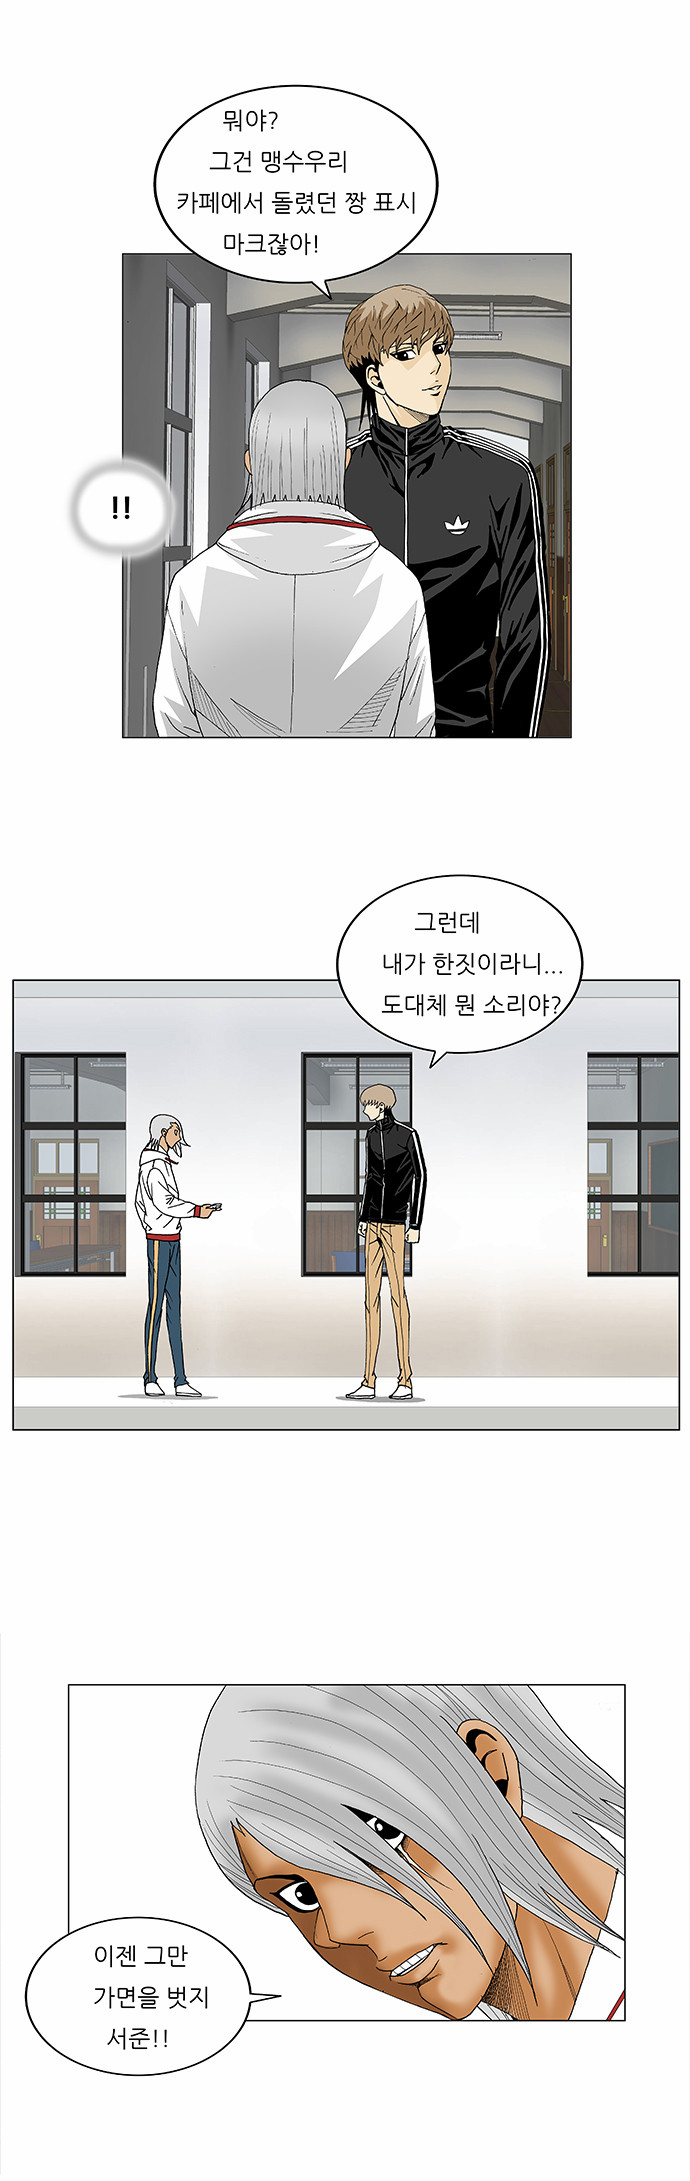 Ultimate Legend - Kang Hae Hyo - Chapter 75 - Page 34